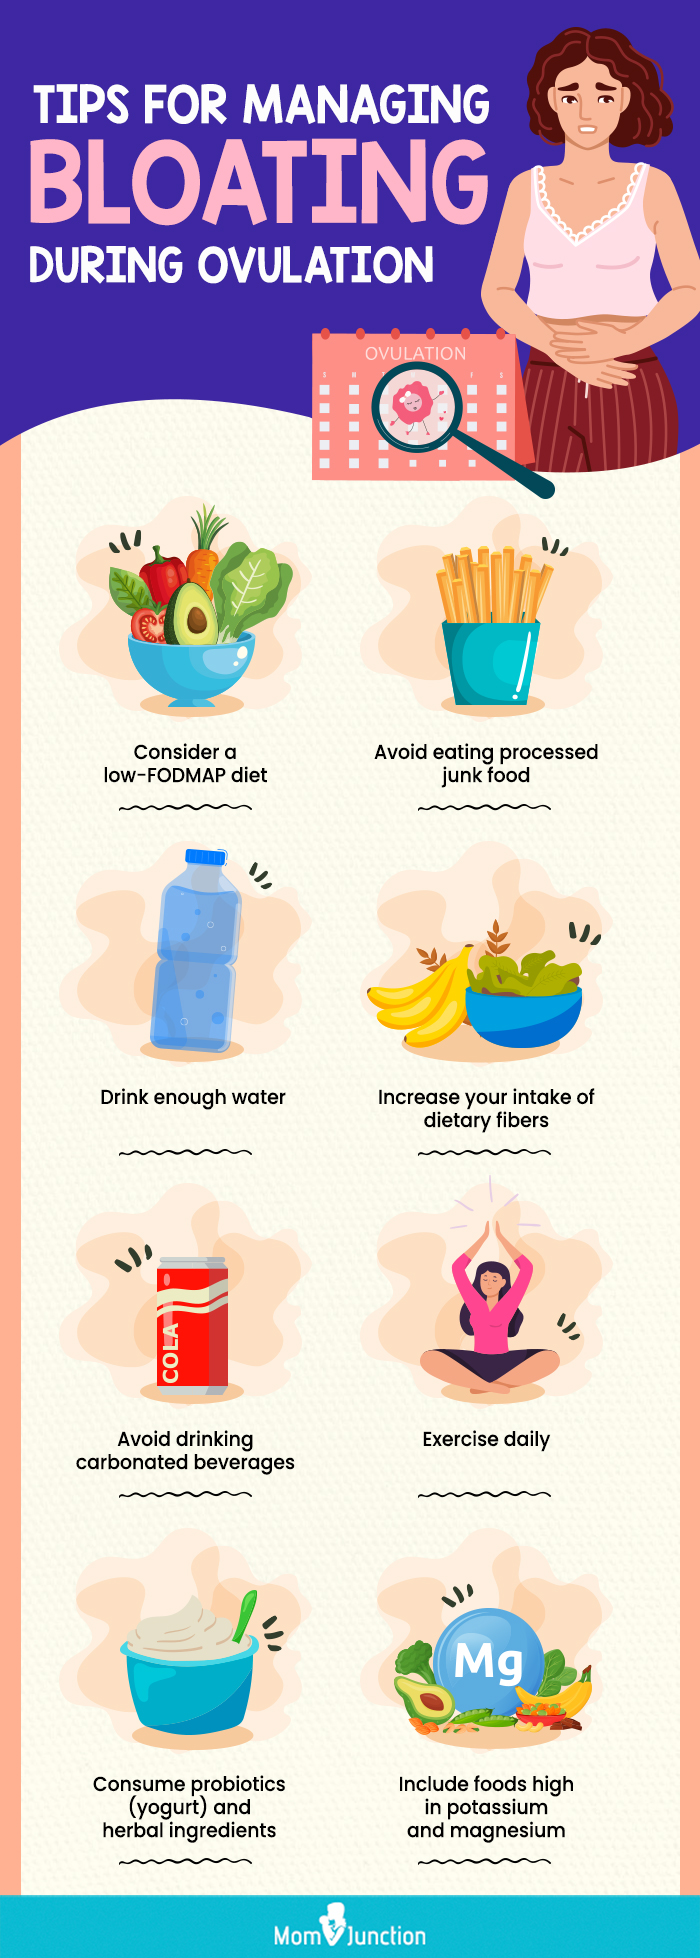 tips for managing bloating during ovulation (infographic)